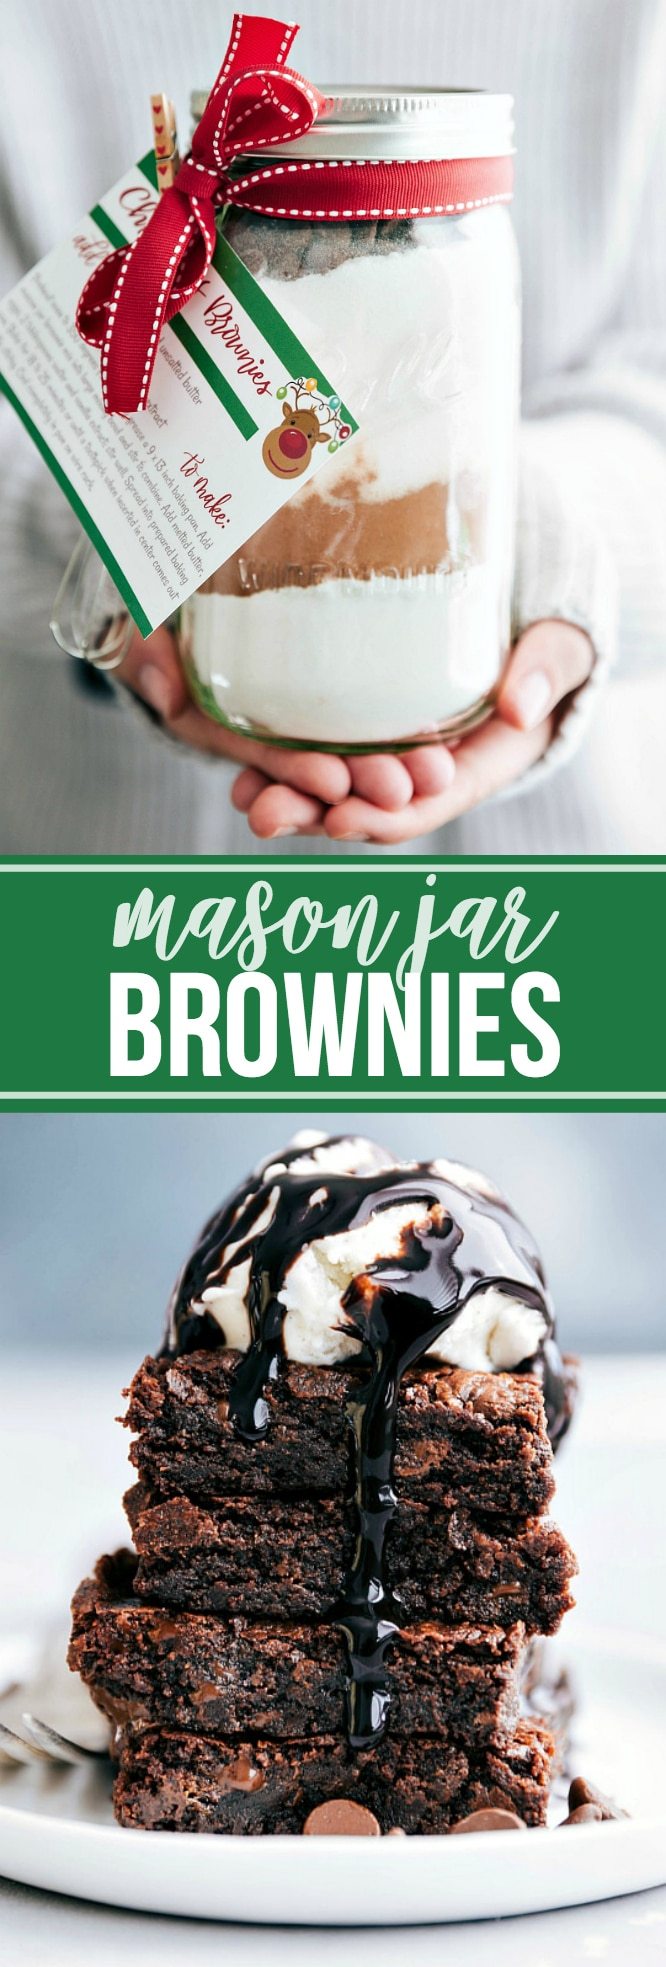 Four easy CHRISTMAS MASON JAR desserts with instructions and free printables. Perfect gifts for family, friends, teachers, etc. Video tutorial! via chelseasmessyapron.com